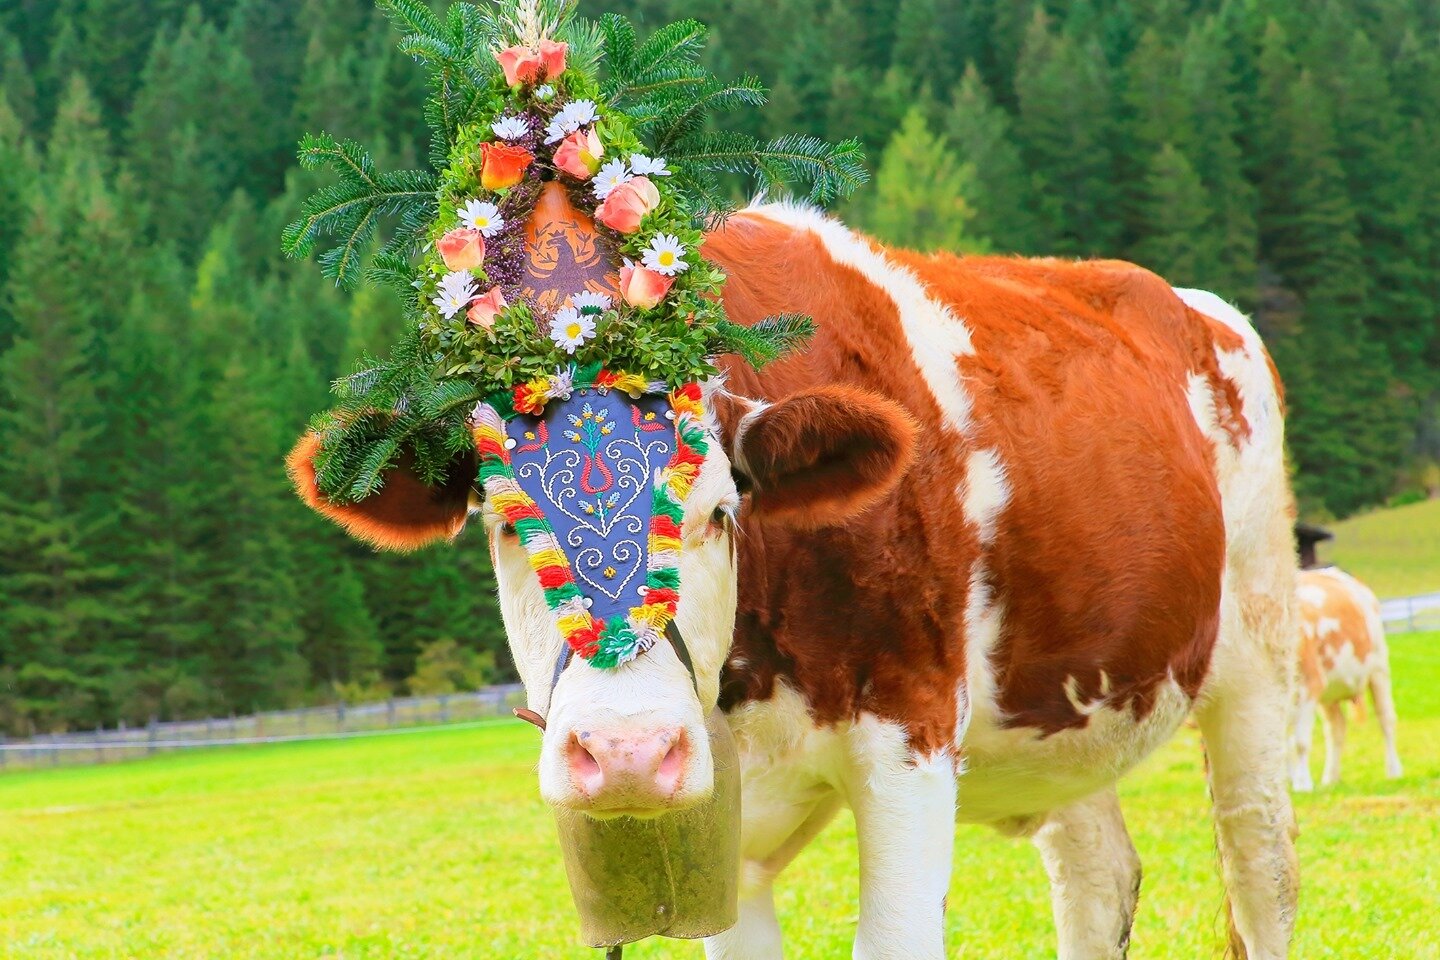 Fall Is The Best Season to Go European and 10 Reasons Why!⁠
⁠
Reason #8: Alpabzug! Homecoming of the cows down from their summer Alpine grazing grounds to winter out at the farm.⁠
⁠
I mean, if adorable cows marching down the Alps in flower regalia, s